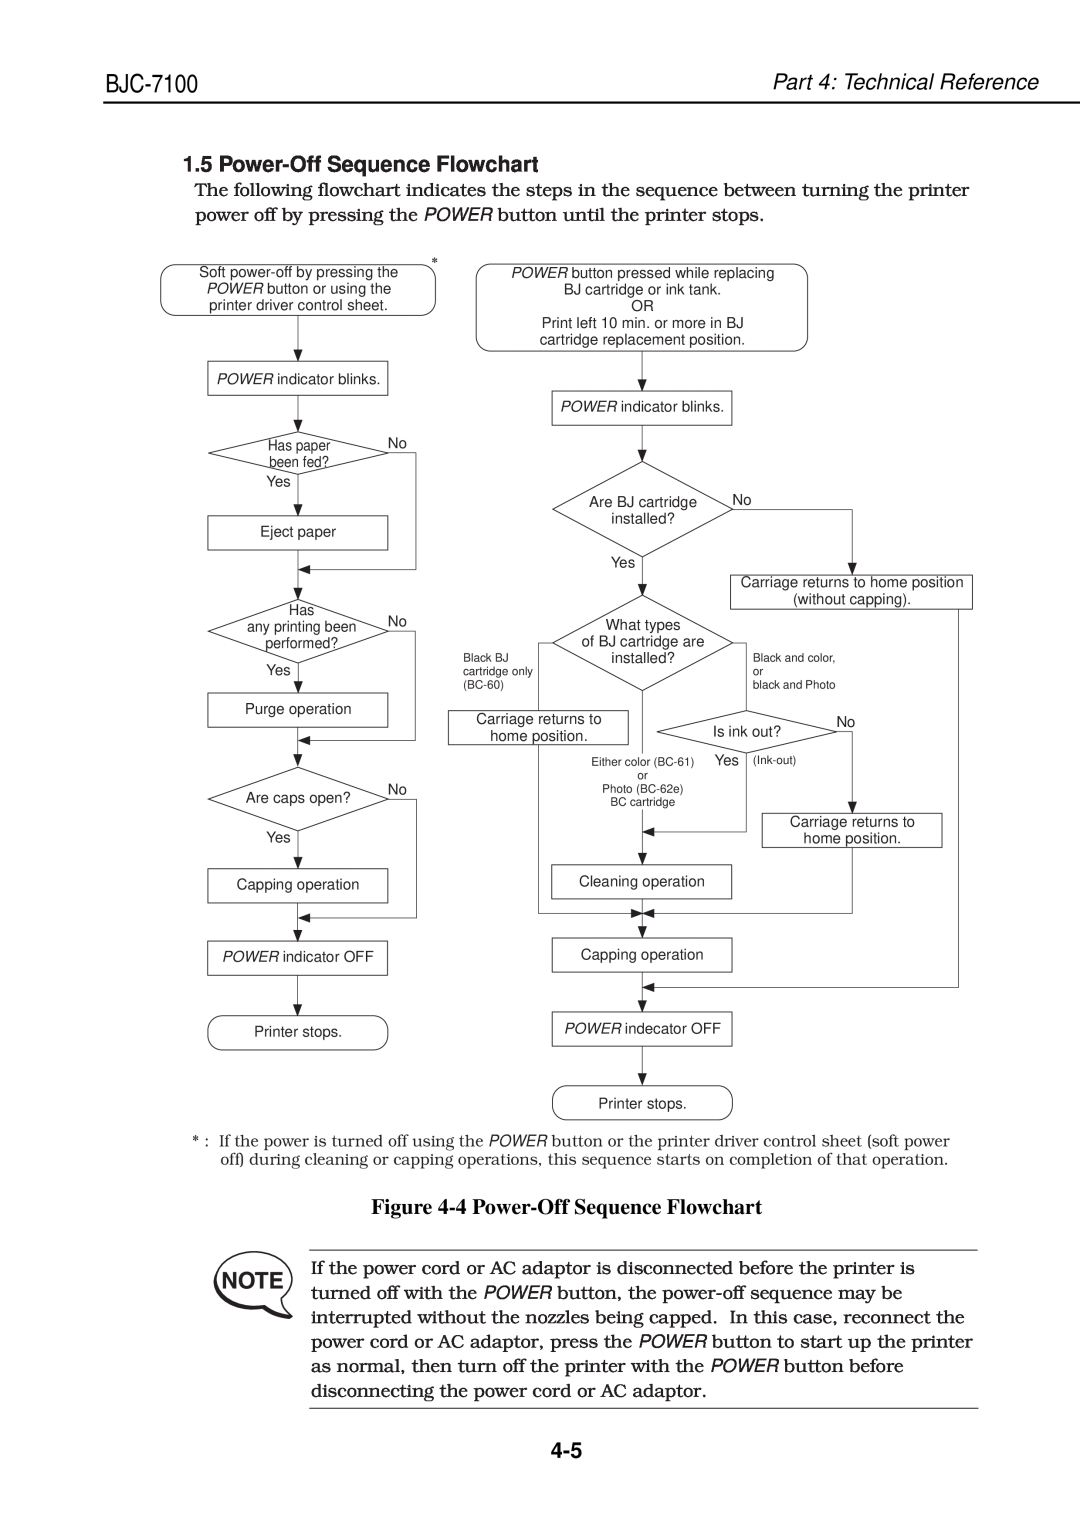 Canon QY8-1360-000 manual 4 Power-Off Sequence Flowchart, BJC-7100, Part 4 Technical Reference 